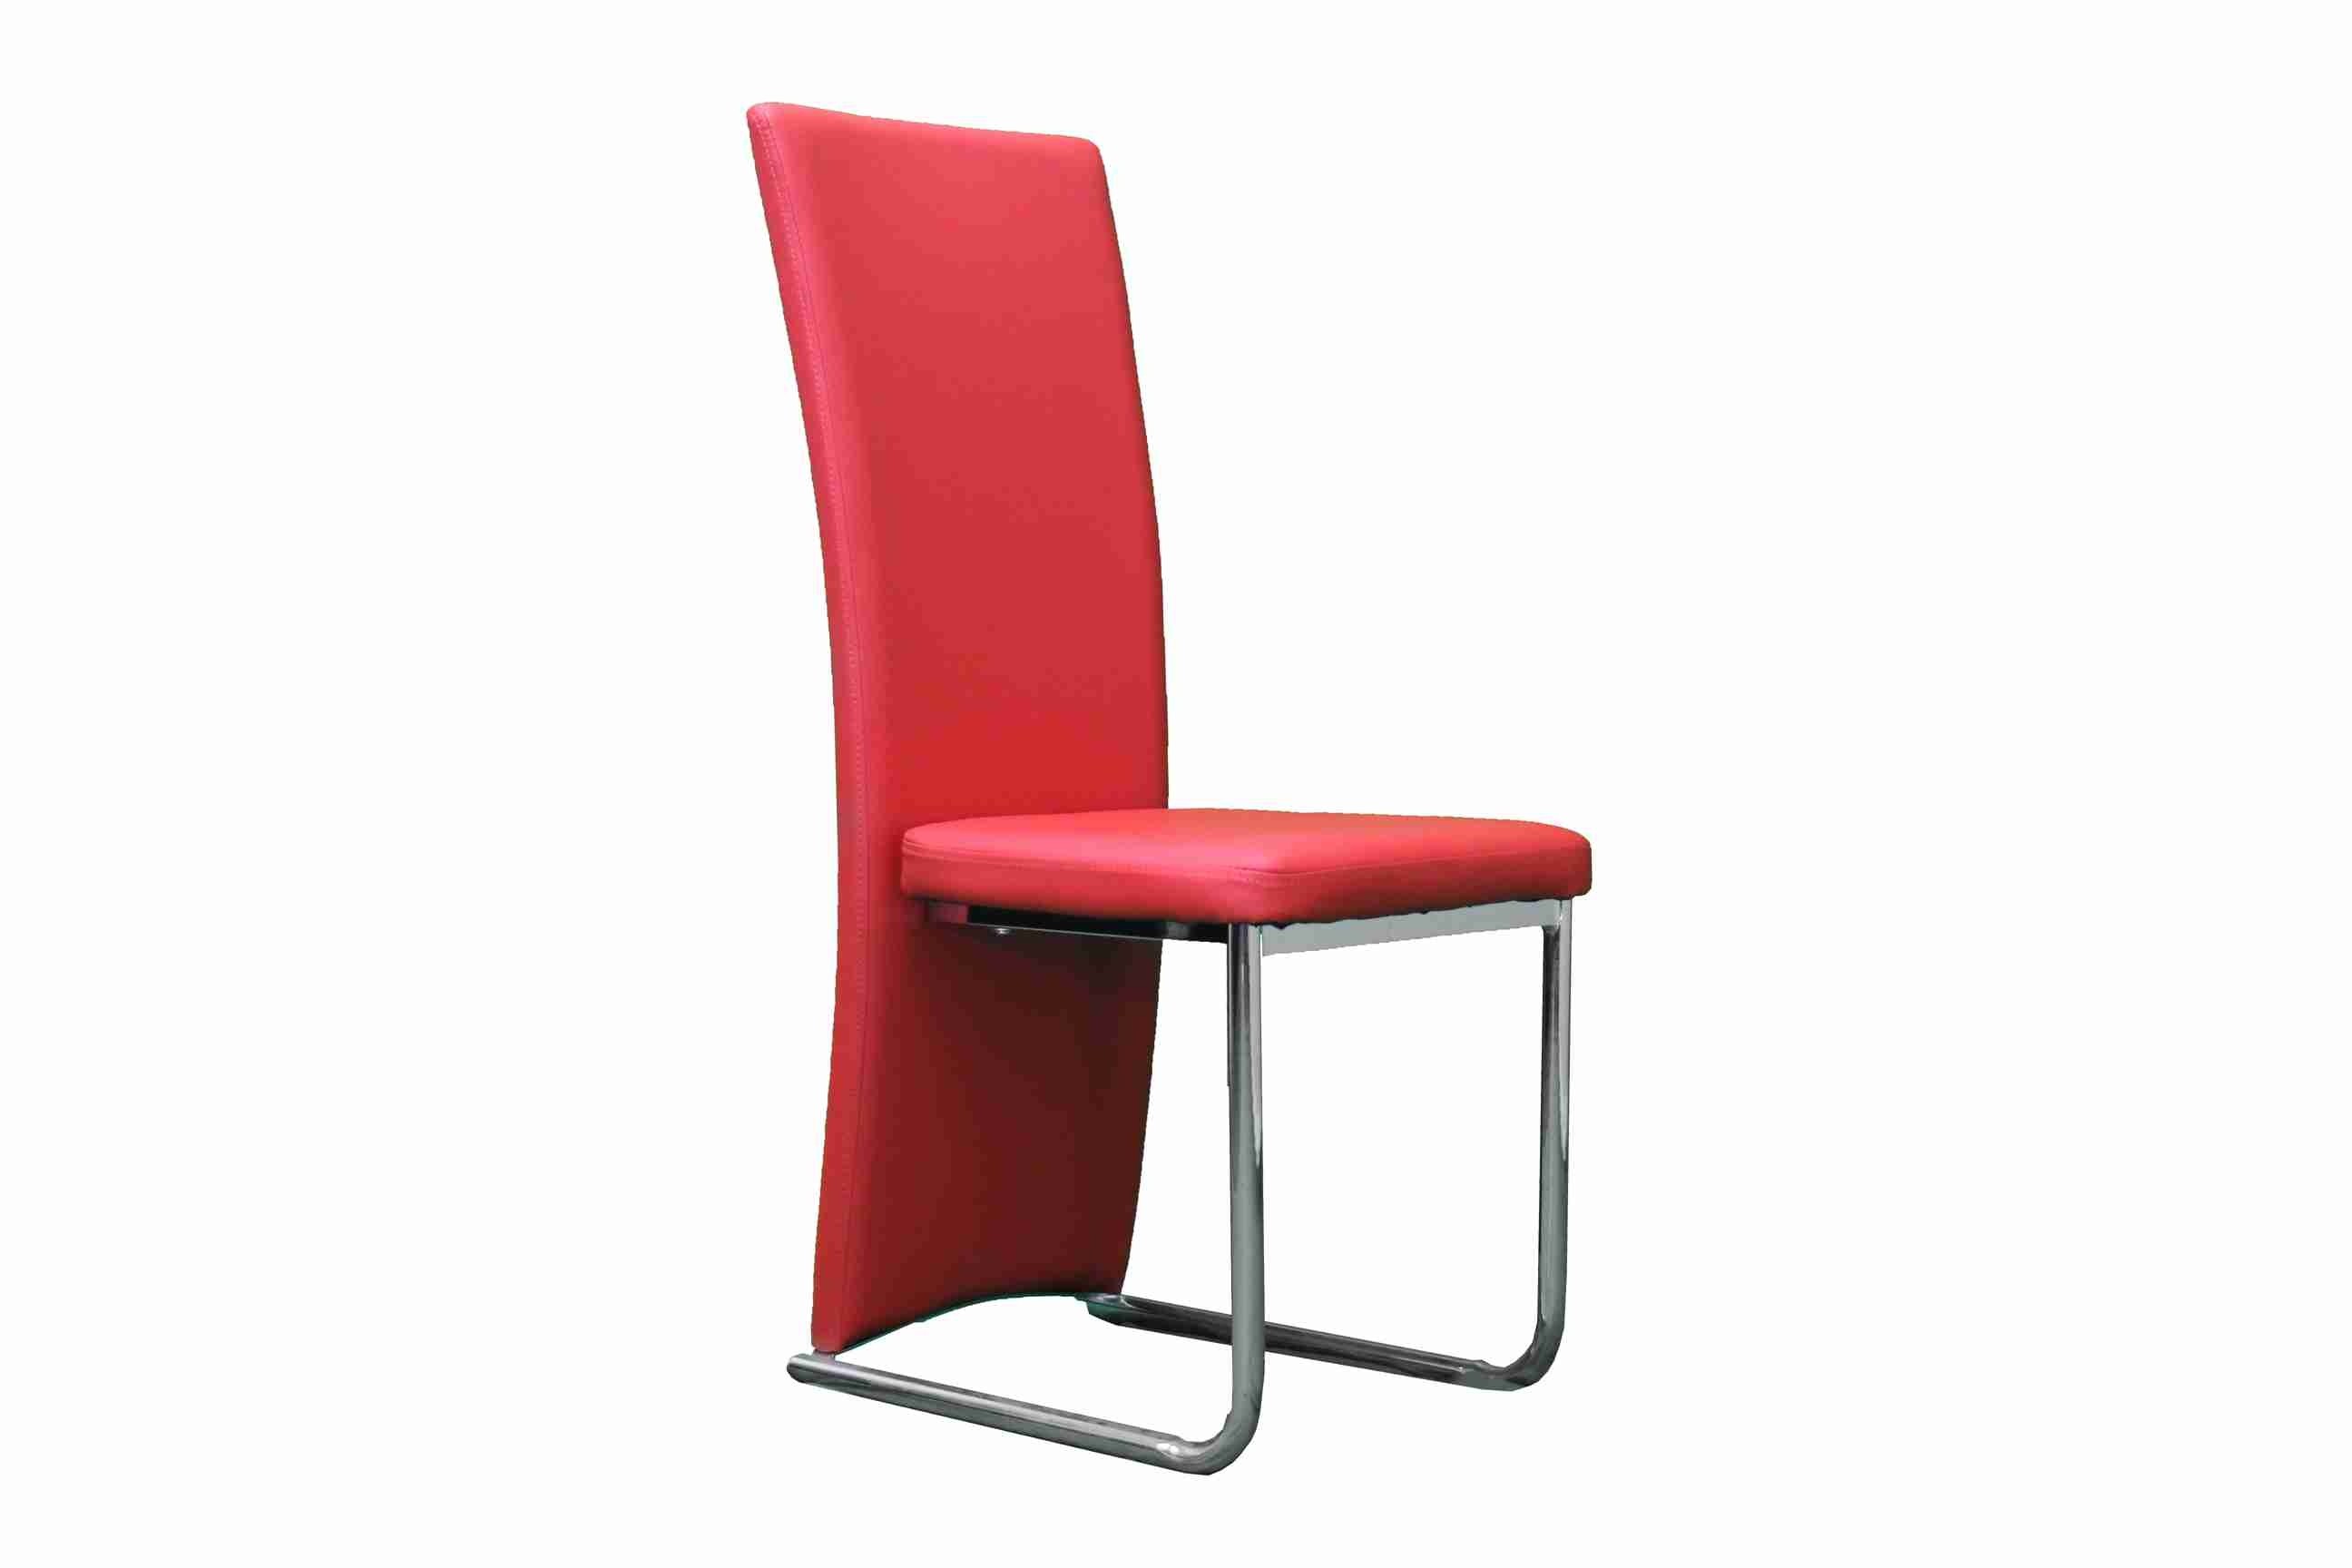 Side Chair PU Leather in Red (Set of 2) -UH-957-RED 